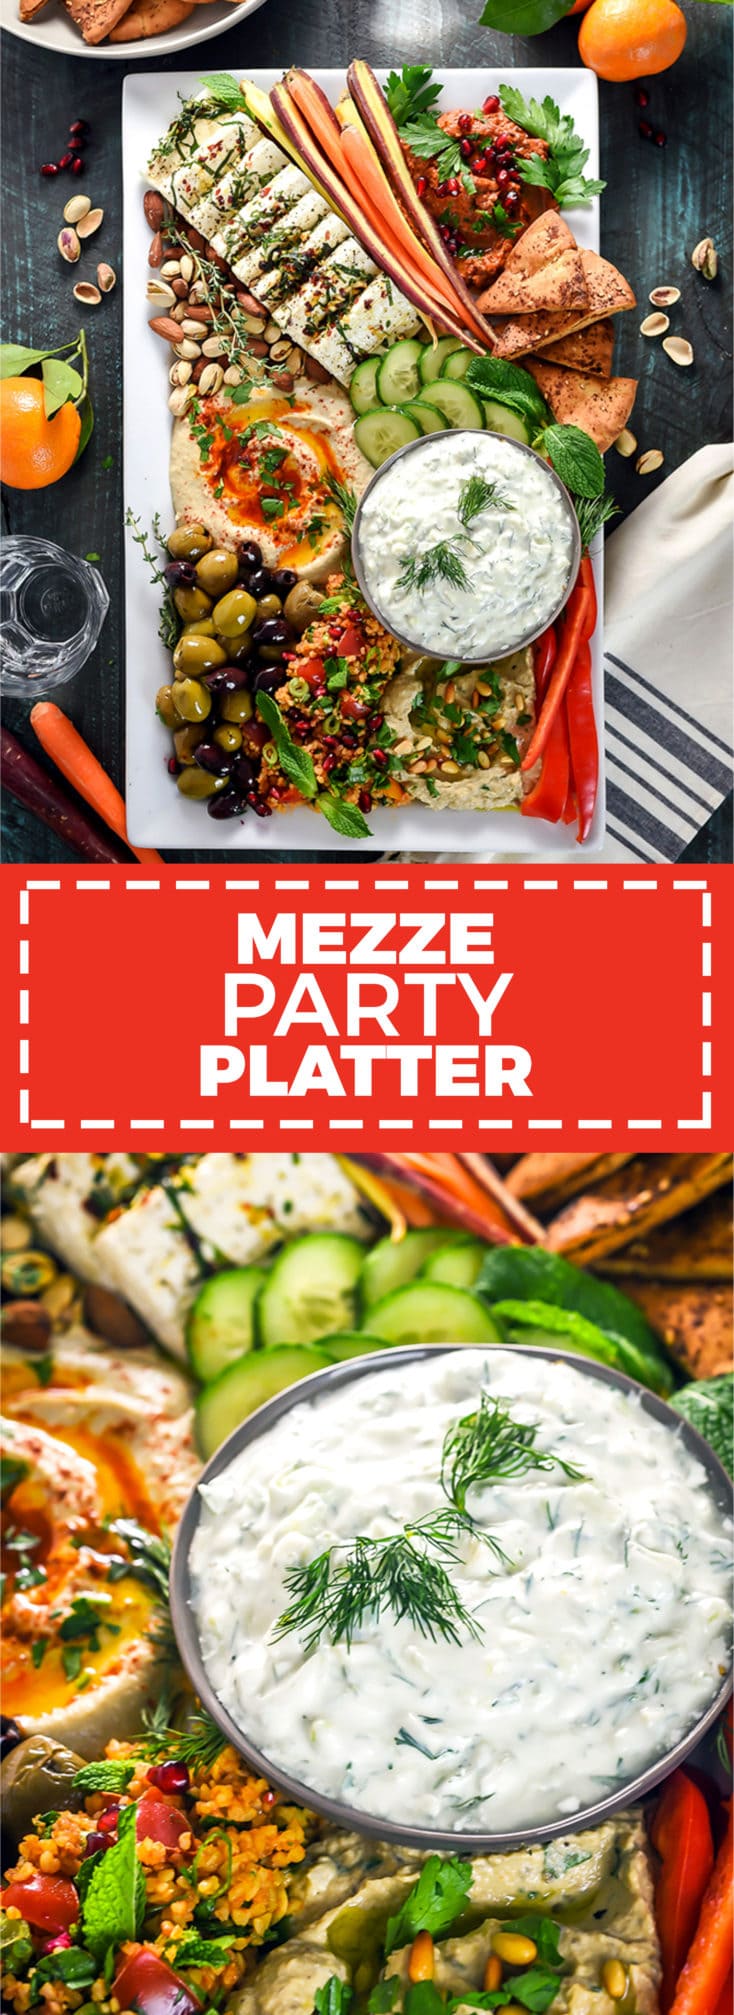 Mezze Party Platter. Loaded up with hummus, baba ganoush, marinated feta, tzatziki, tomato rice salad, muhammara, za'atar pita chips, sliced veggies, and nuts, this platter is the perfect spread of Mediterranean and Middle Eastern flavors. | hostthetoast.com